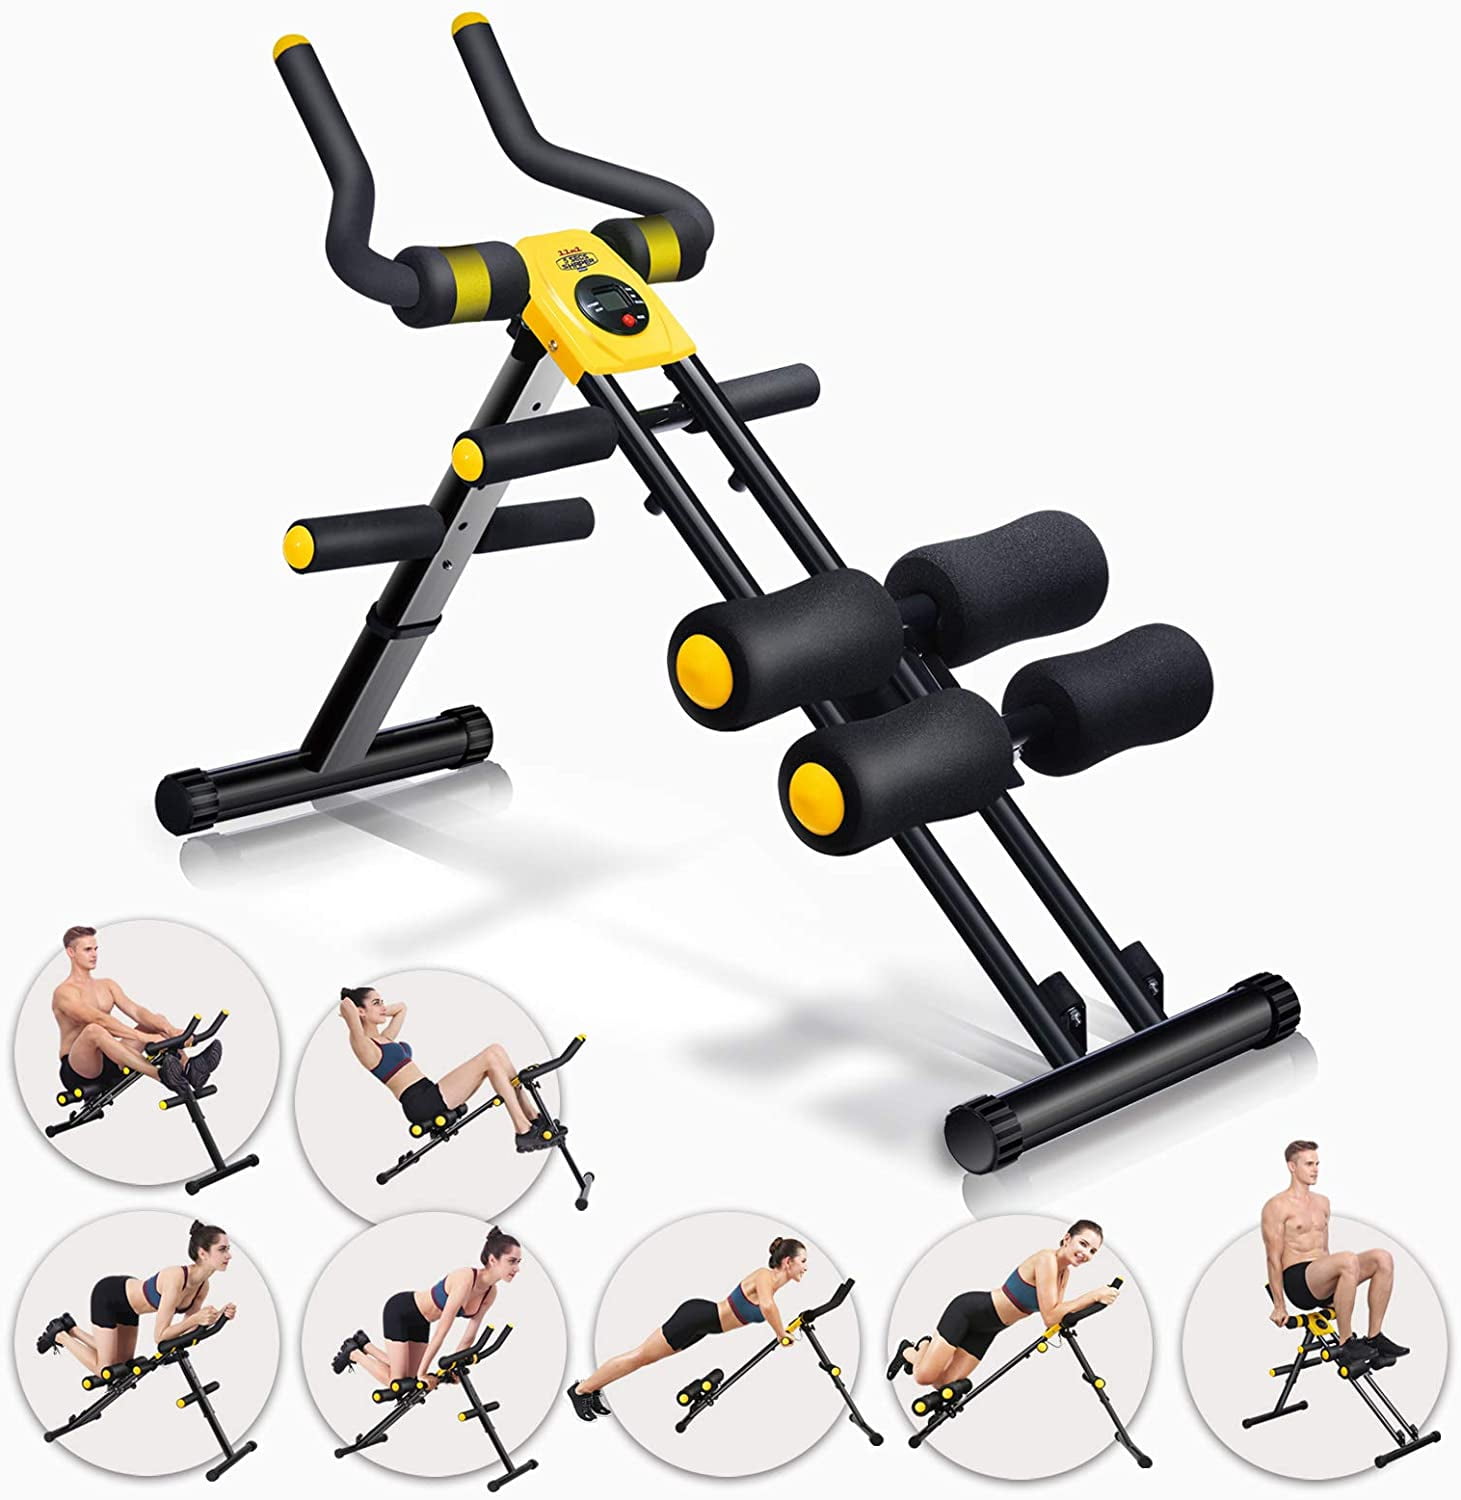 Abdominal Exerciser Equipment AB Mat Pad Trainer for Home Office Workout